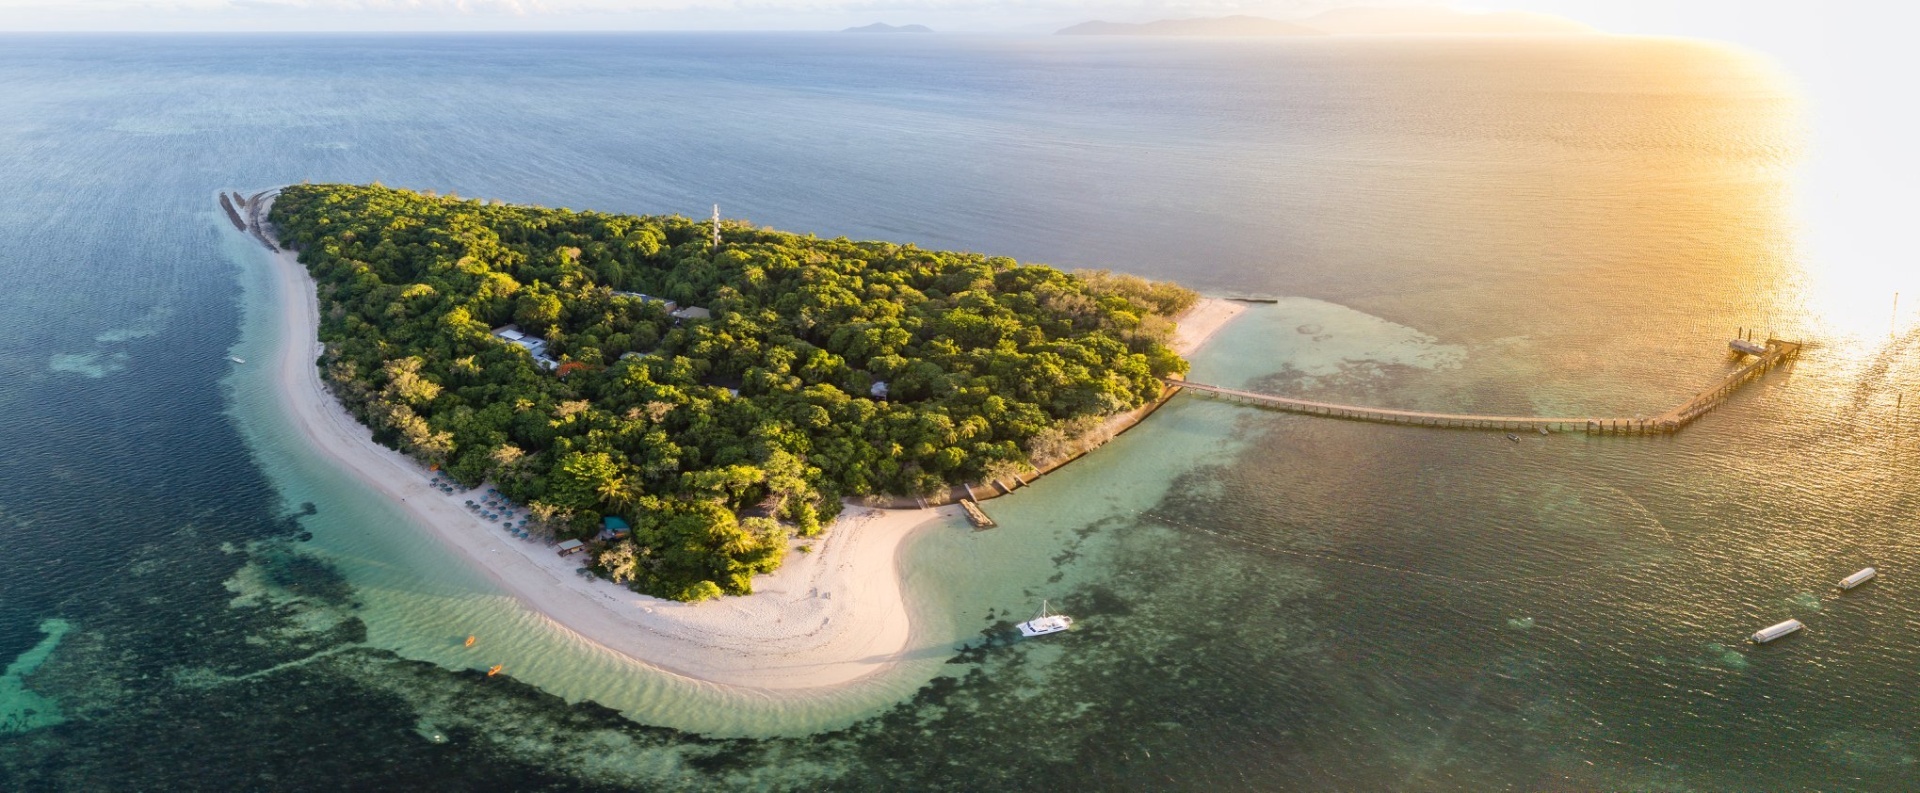 Green Island is just 27km off shore from Cairns